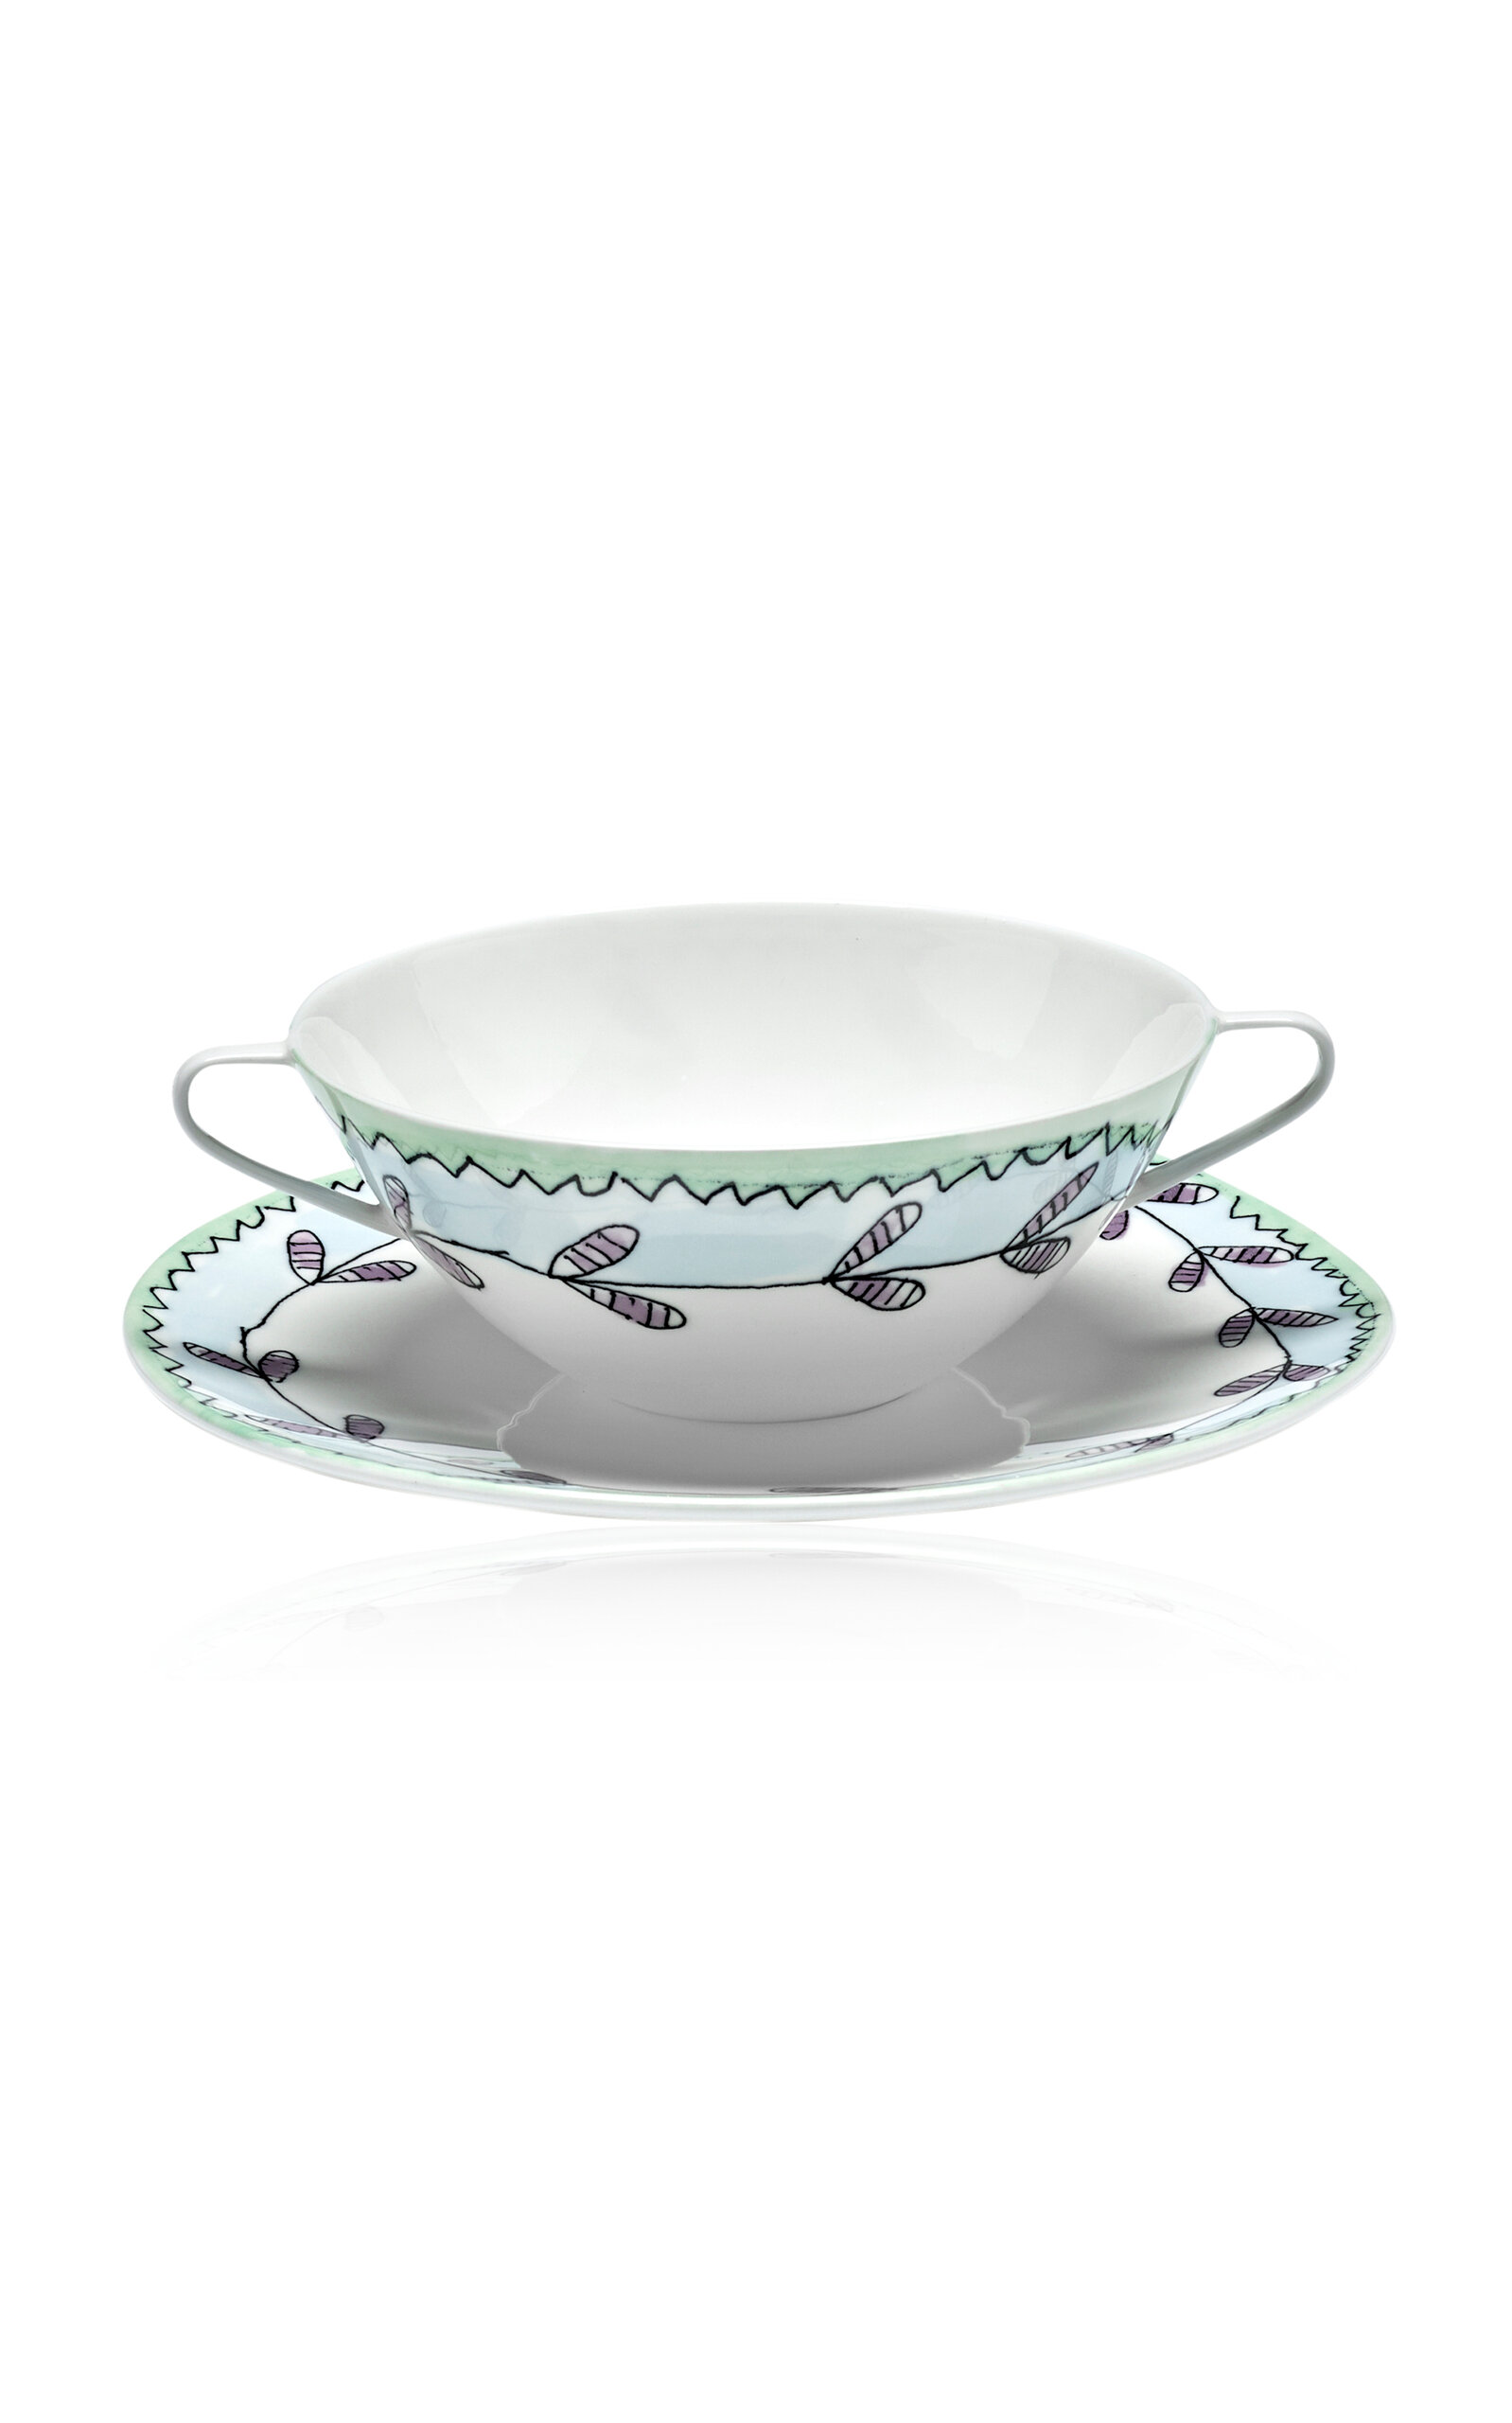 Marni For Serax Serax Marni Midnight Flowers Soup Bowl With Saucer D18cm Blossom Milk In White